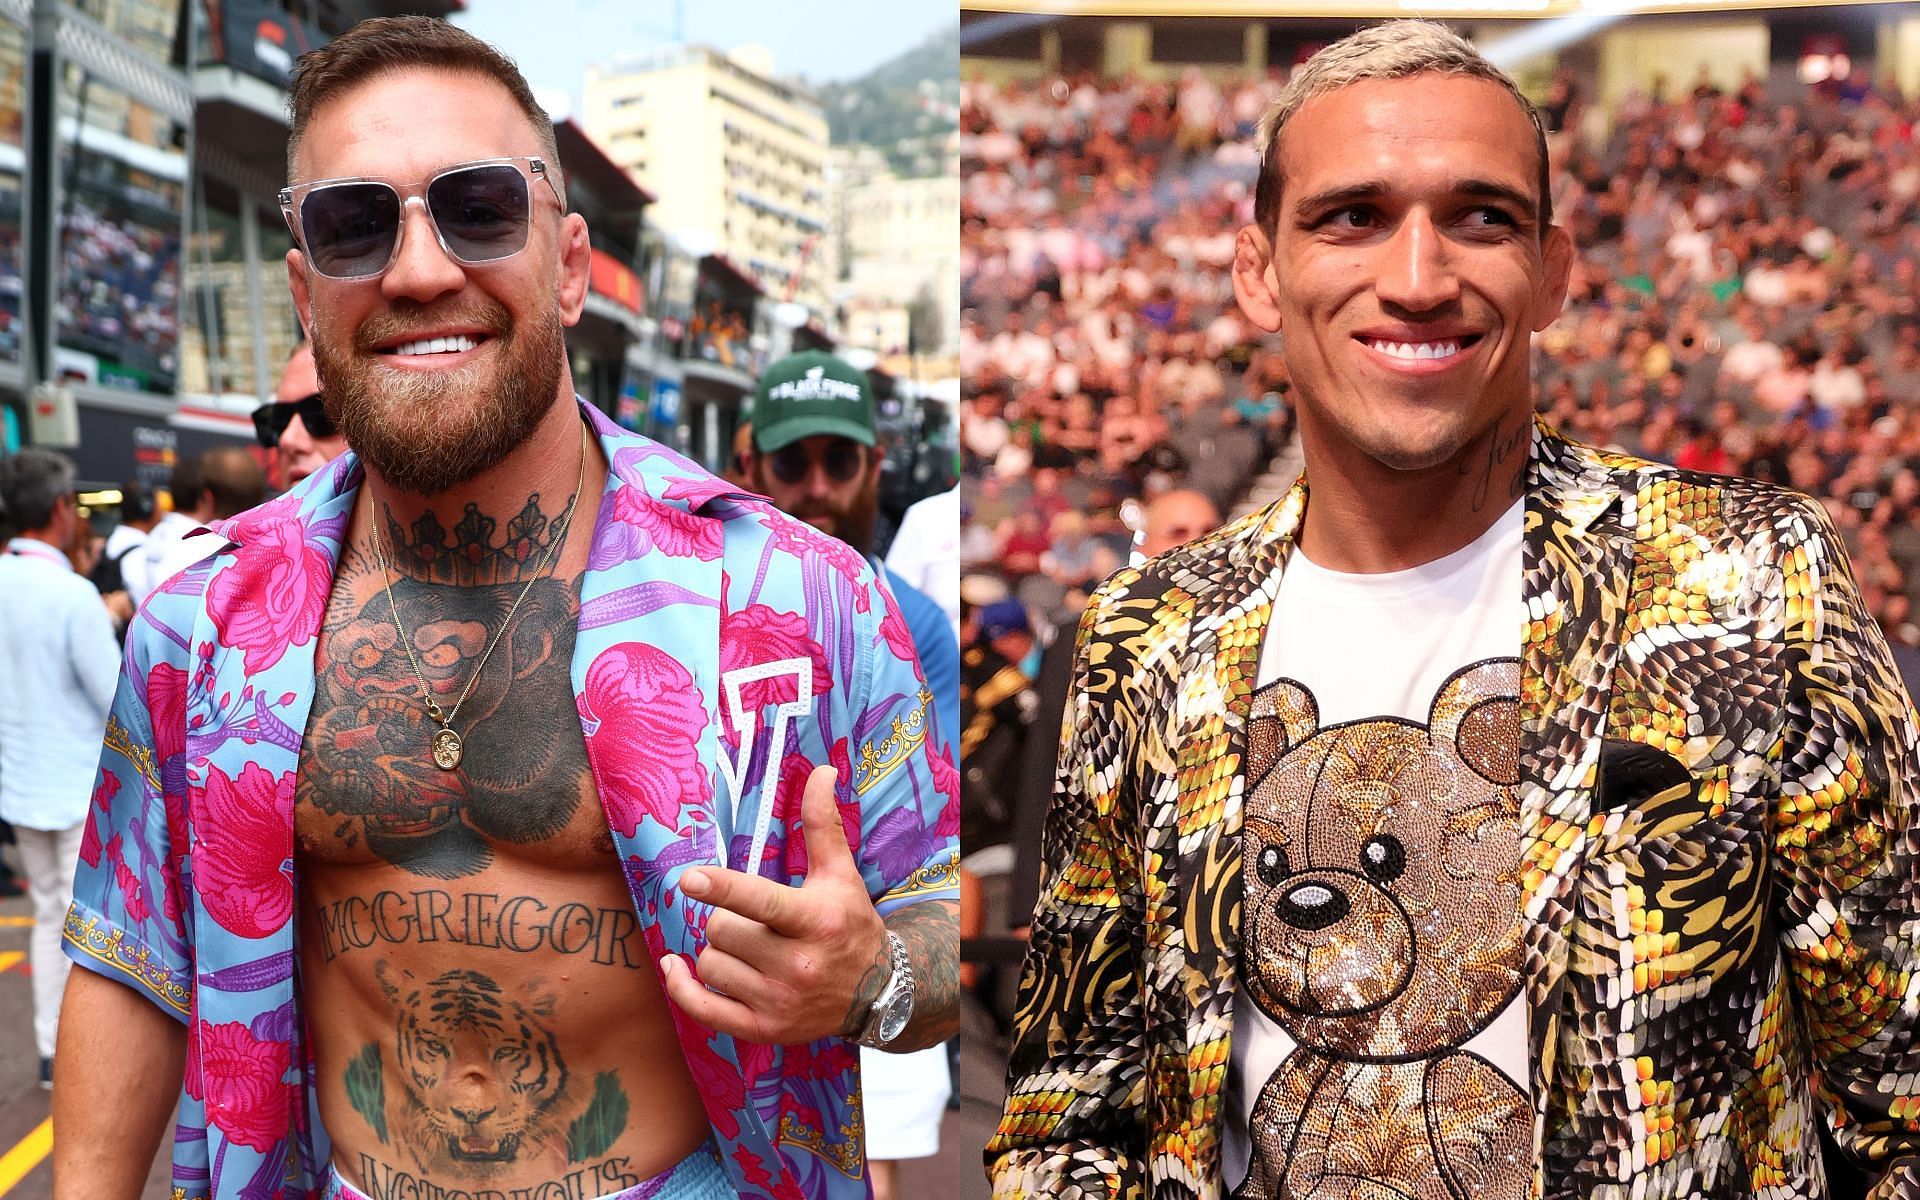 Conor McGregor (left) and Charles Oliveira (right) (Images via Getty)